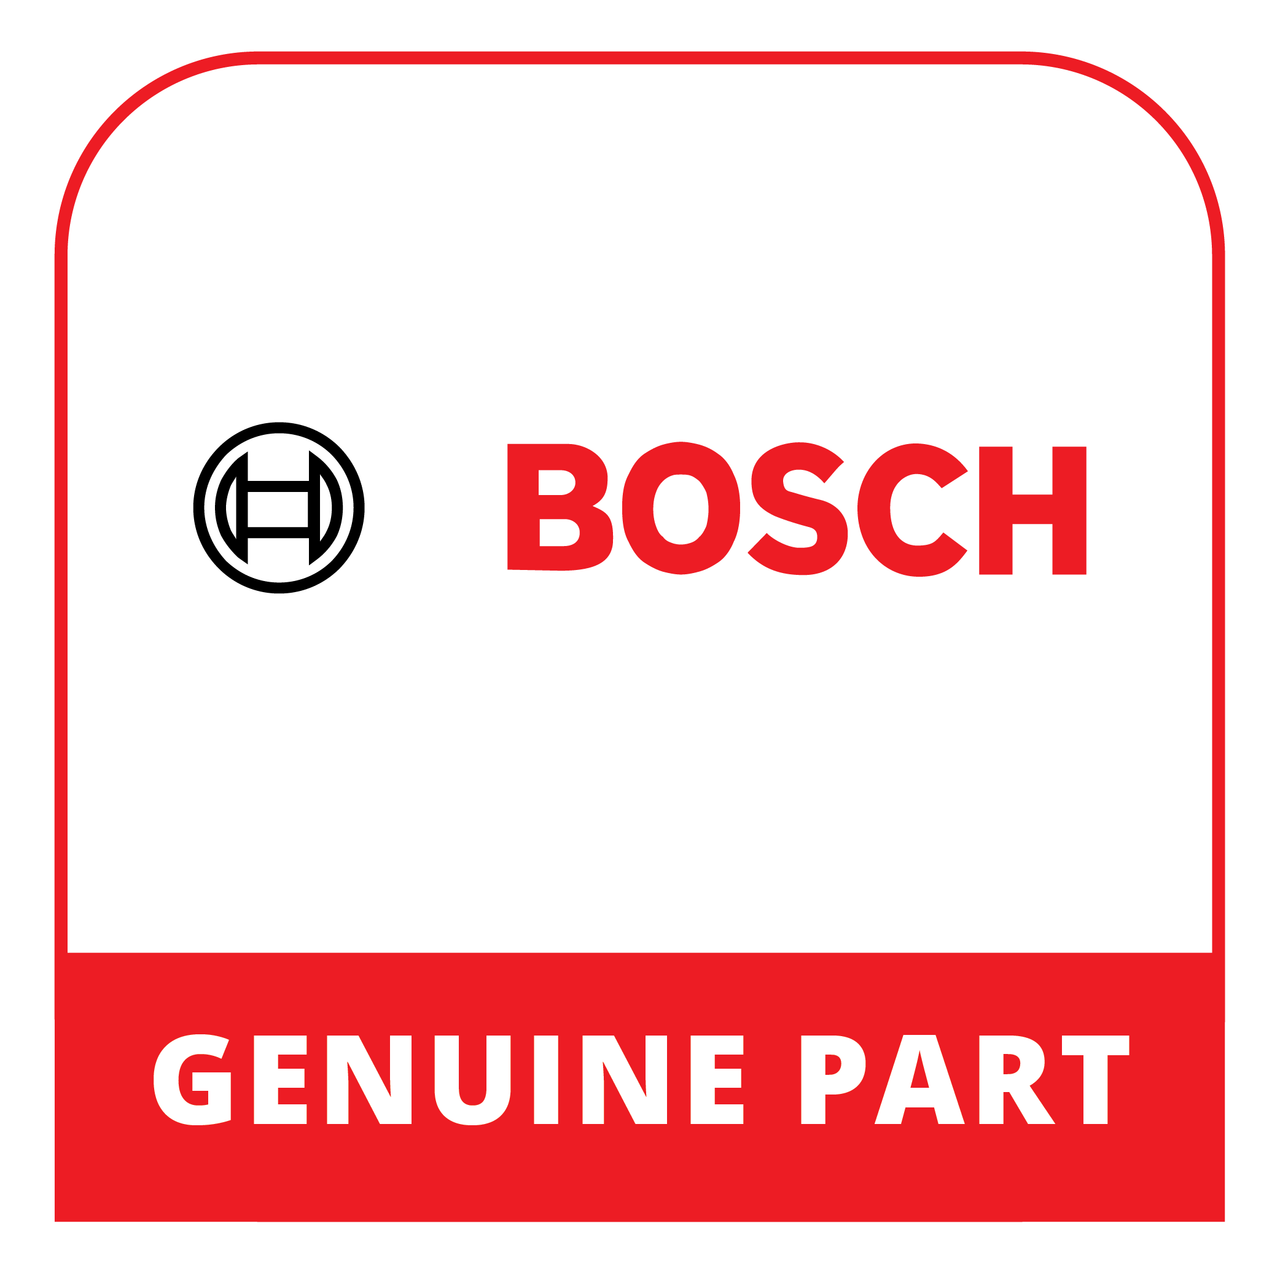 Bosch (Thermador) 18062233 - Operating/Installation Instructions - Genuine Bosch (Thermador) Part